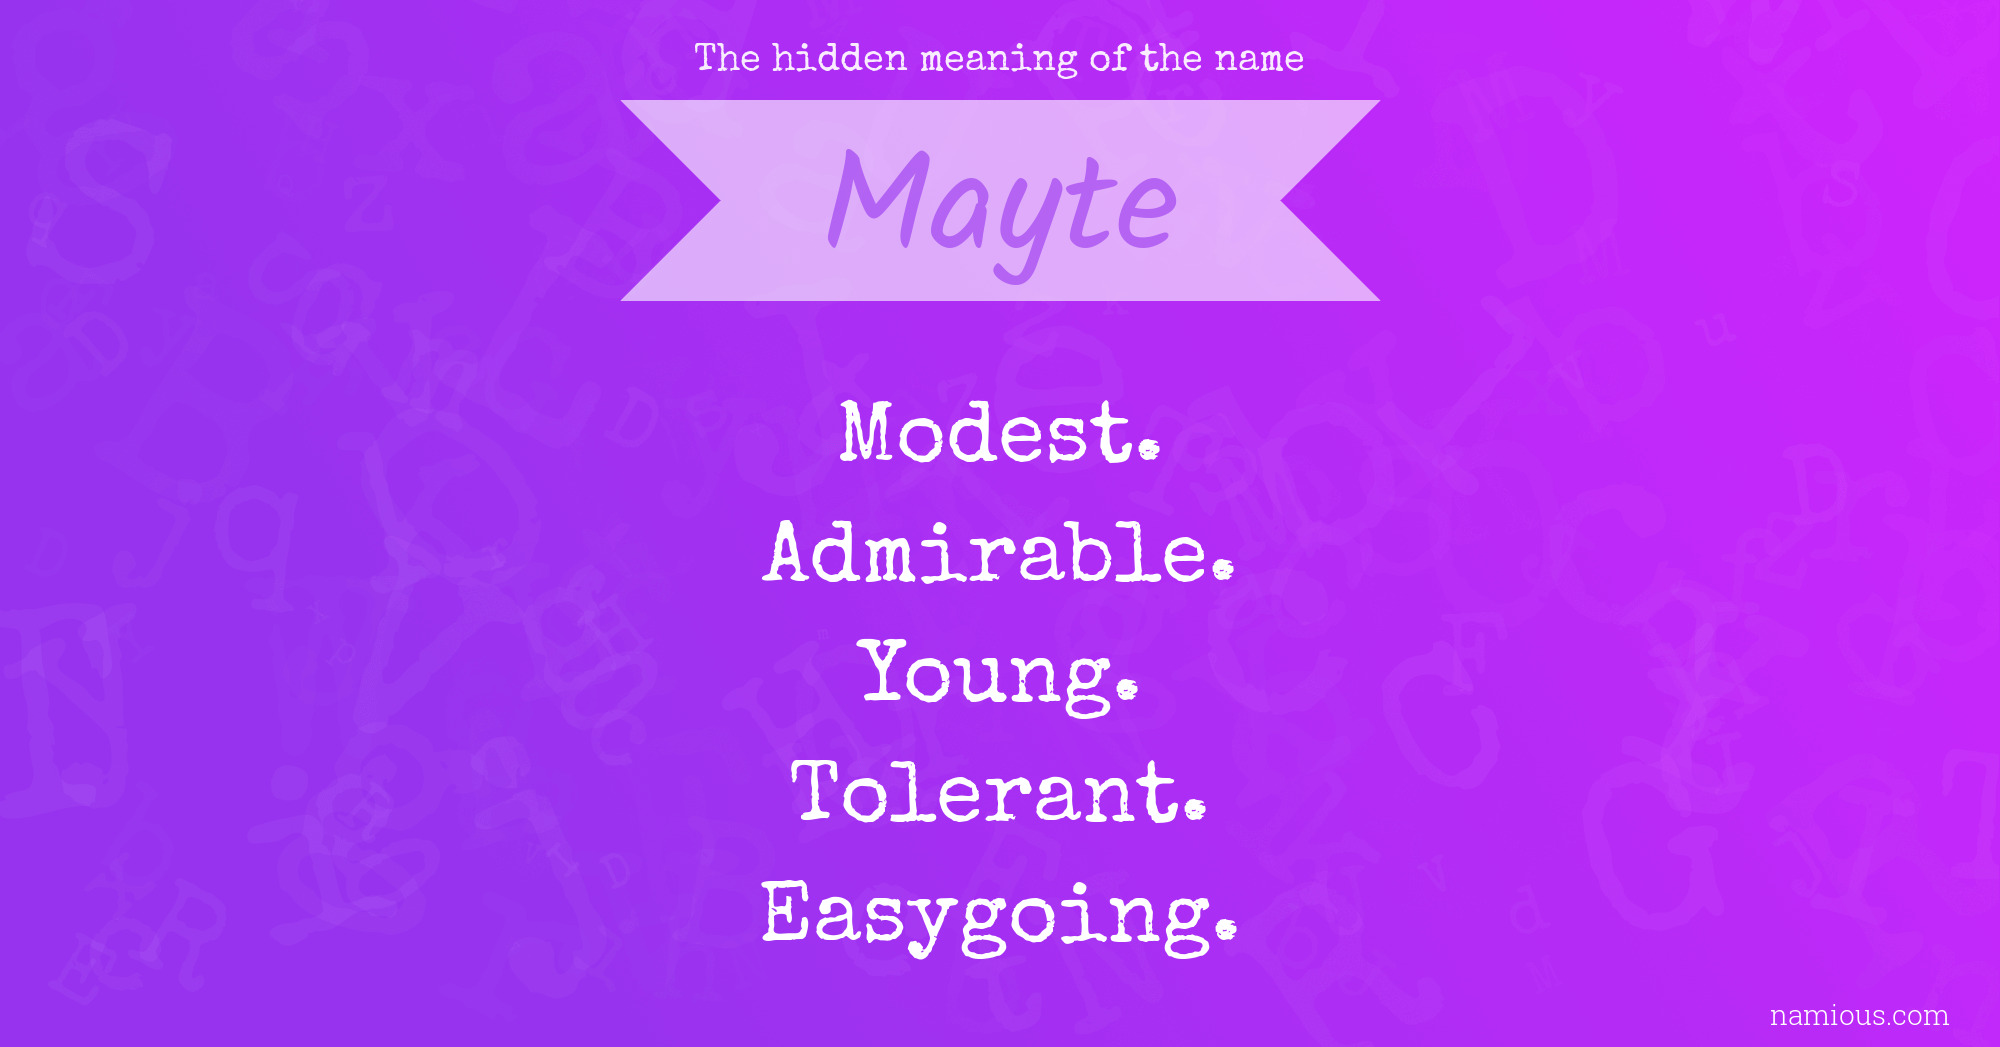 The hidden meaning of the name Mayte